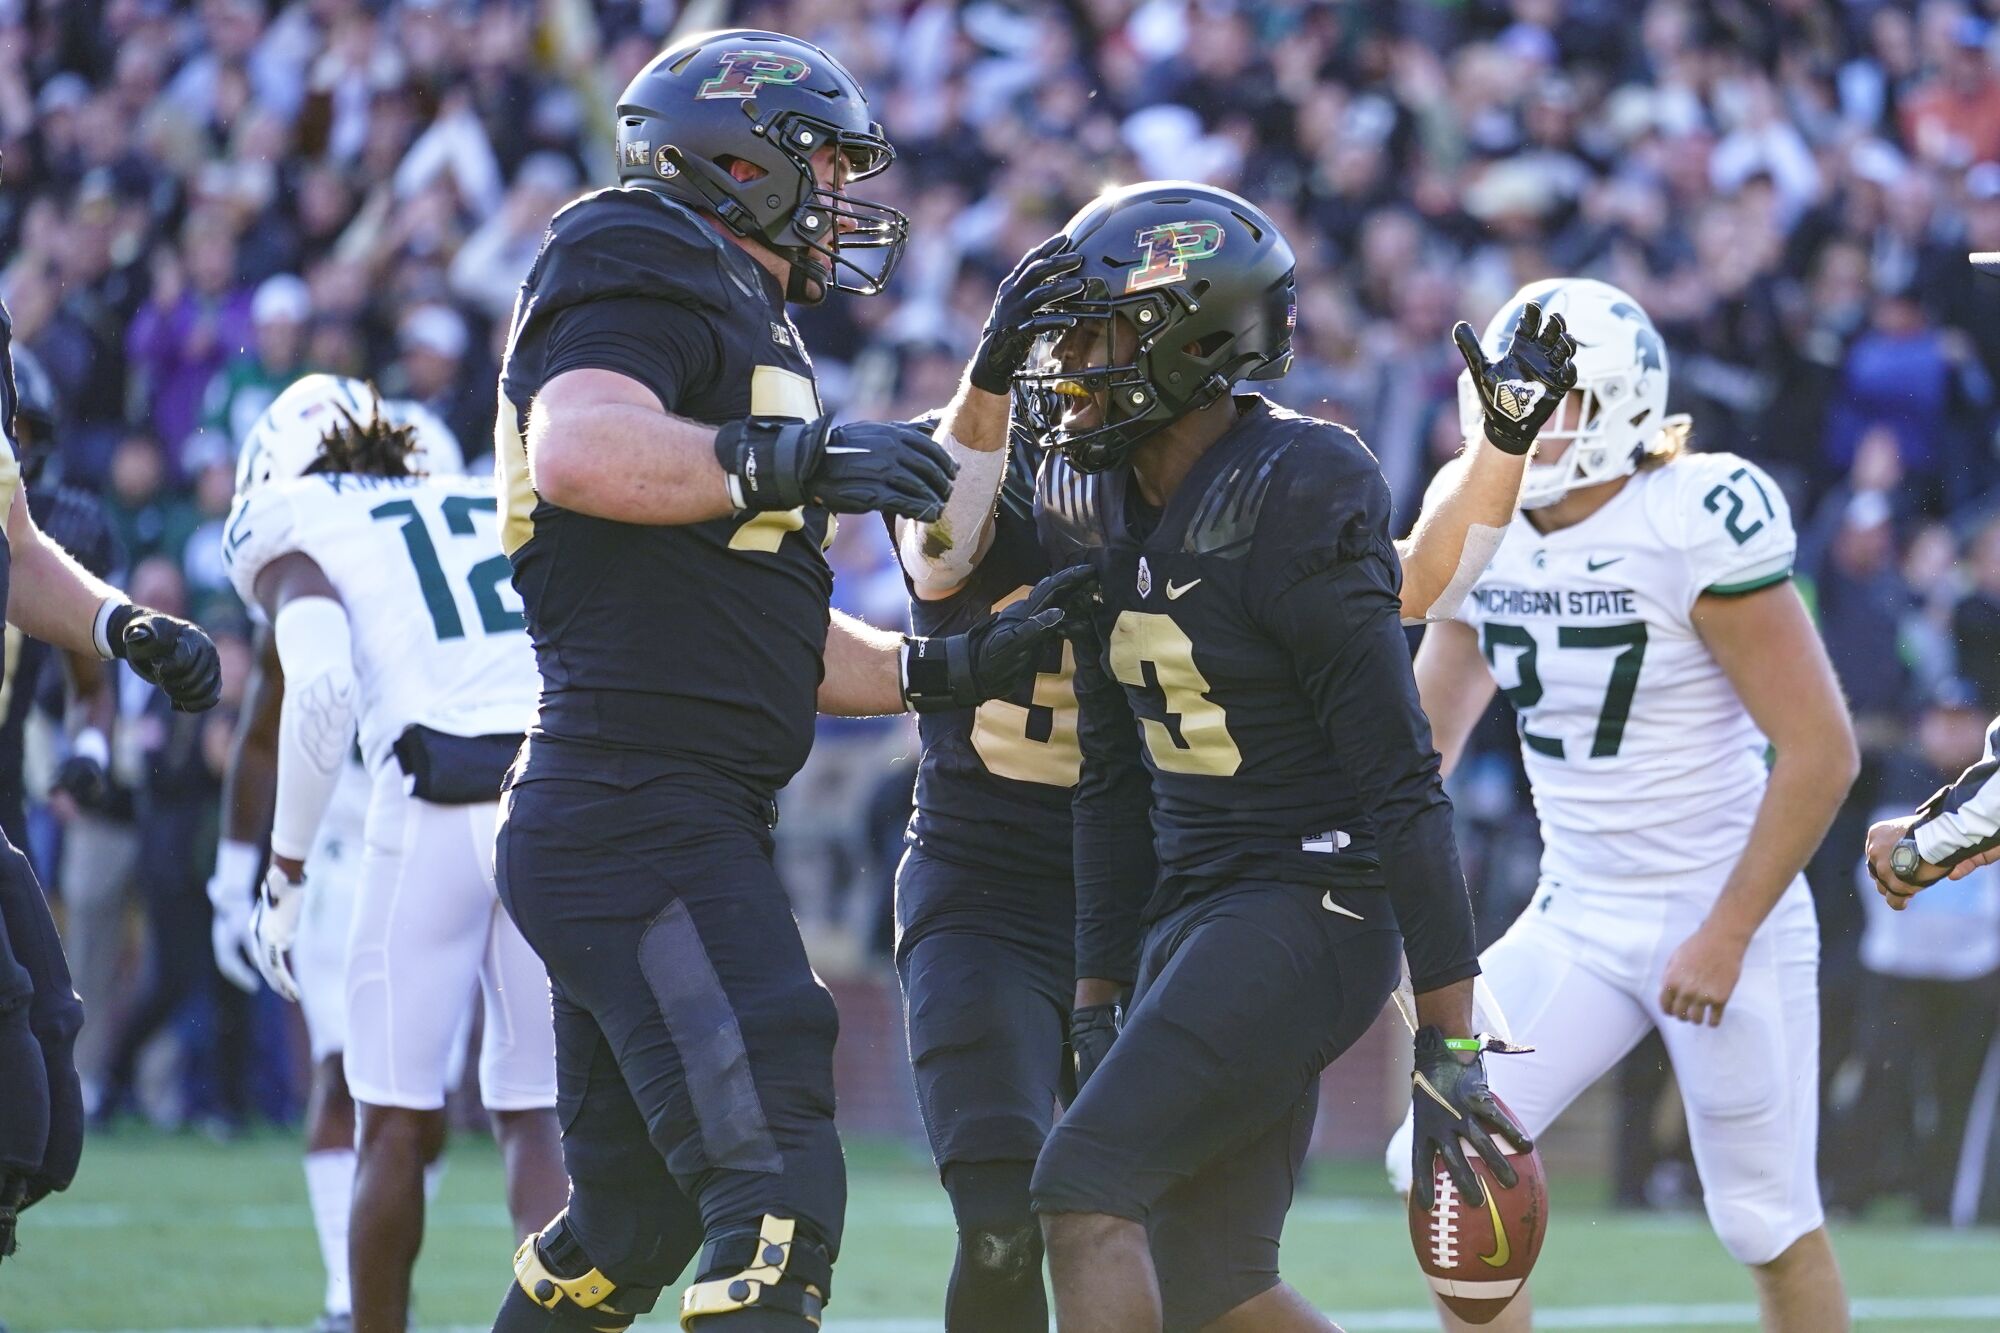 Purdue wide receiver David Bell celebrates a touchdown with offensive lineman Spencer Holstage.